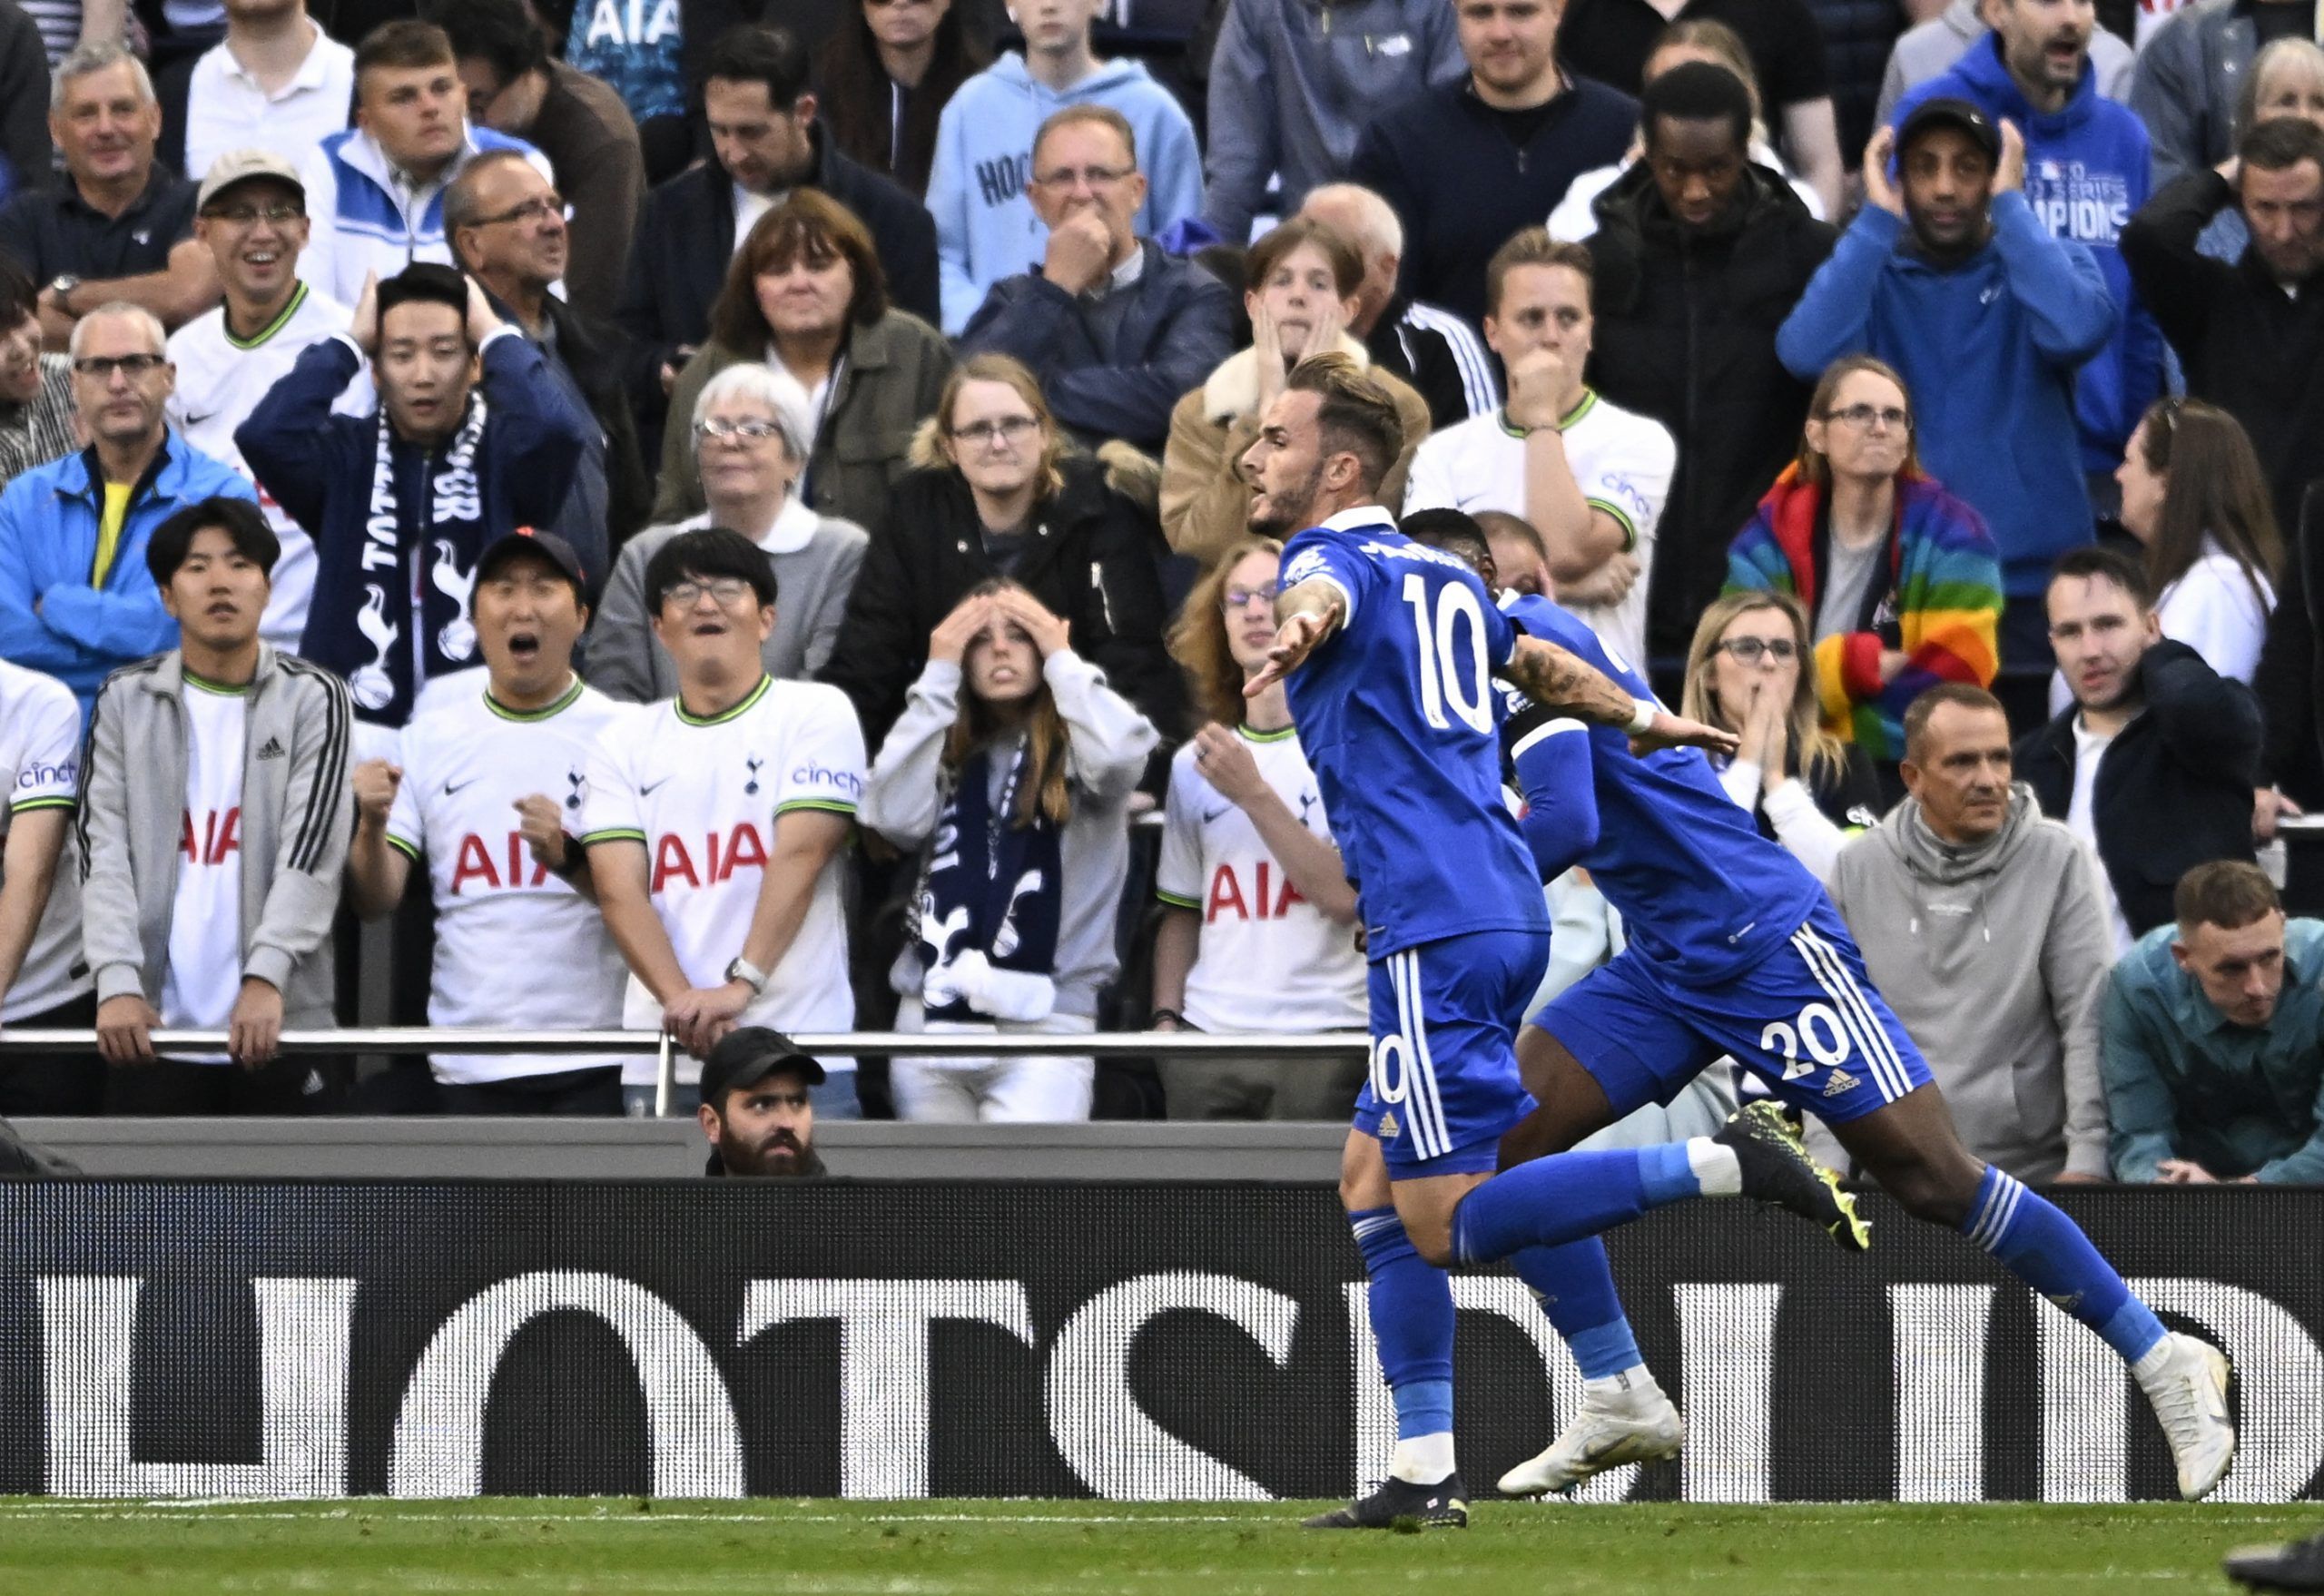 Soccer Football - Premier League - Tottenham Hotspur v Leicester City - Tottenham Hotspur Stadium, London, Britain - September 17, 2022 Leicester City's James Maddison celebrates scoring their second goal with Patson Daka REUTERS/Tony Obrien EDITORIAL USE ONLY. No use with unauthorized audio, video, data, fixture lists, club/league logos or 'live' services. Online in-match use limited to 75 images, no video emulation. No use in betting, games or single club /league/player publications.  Please c